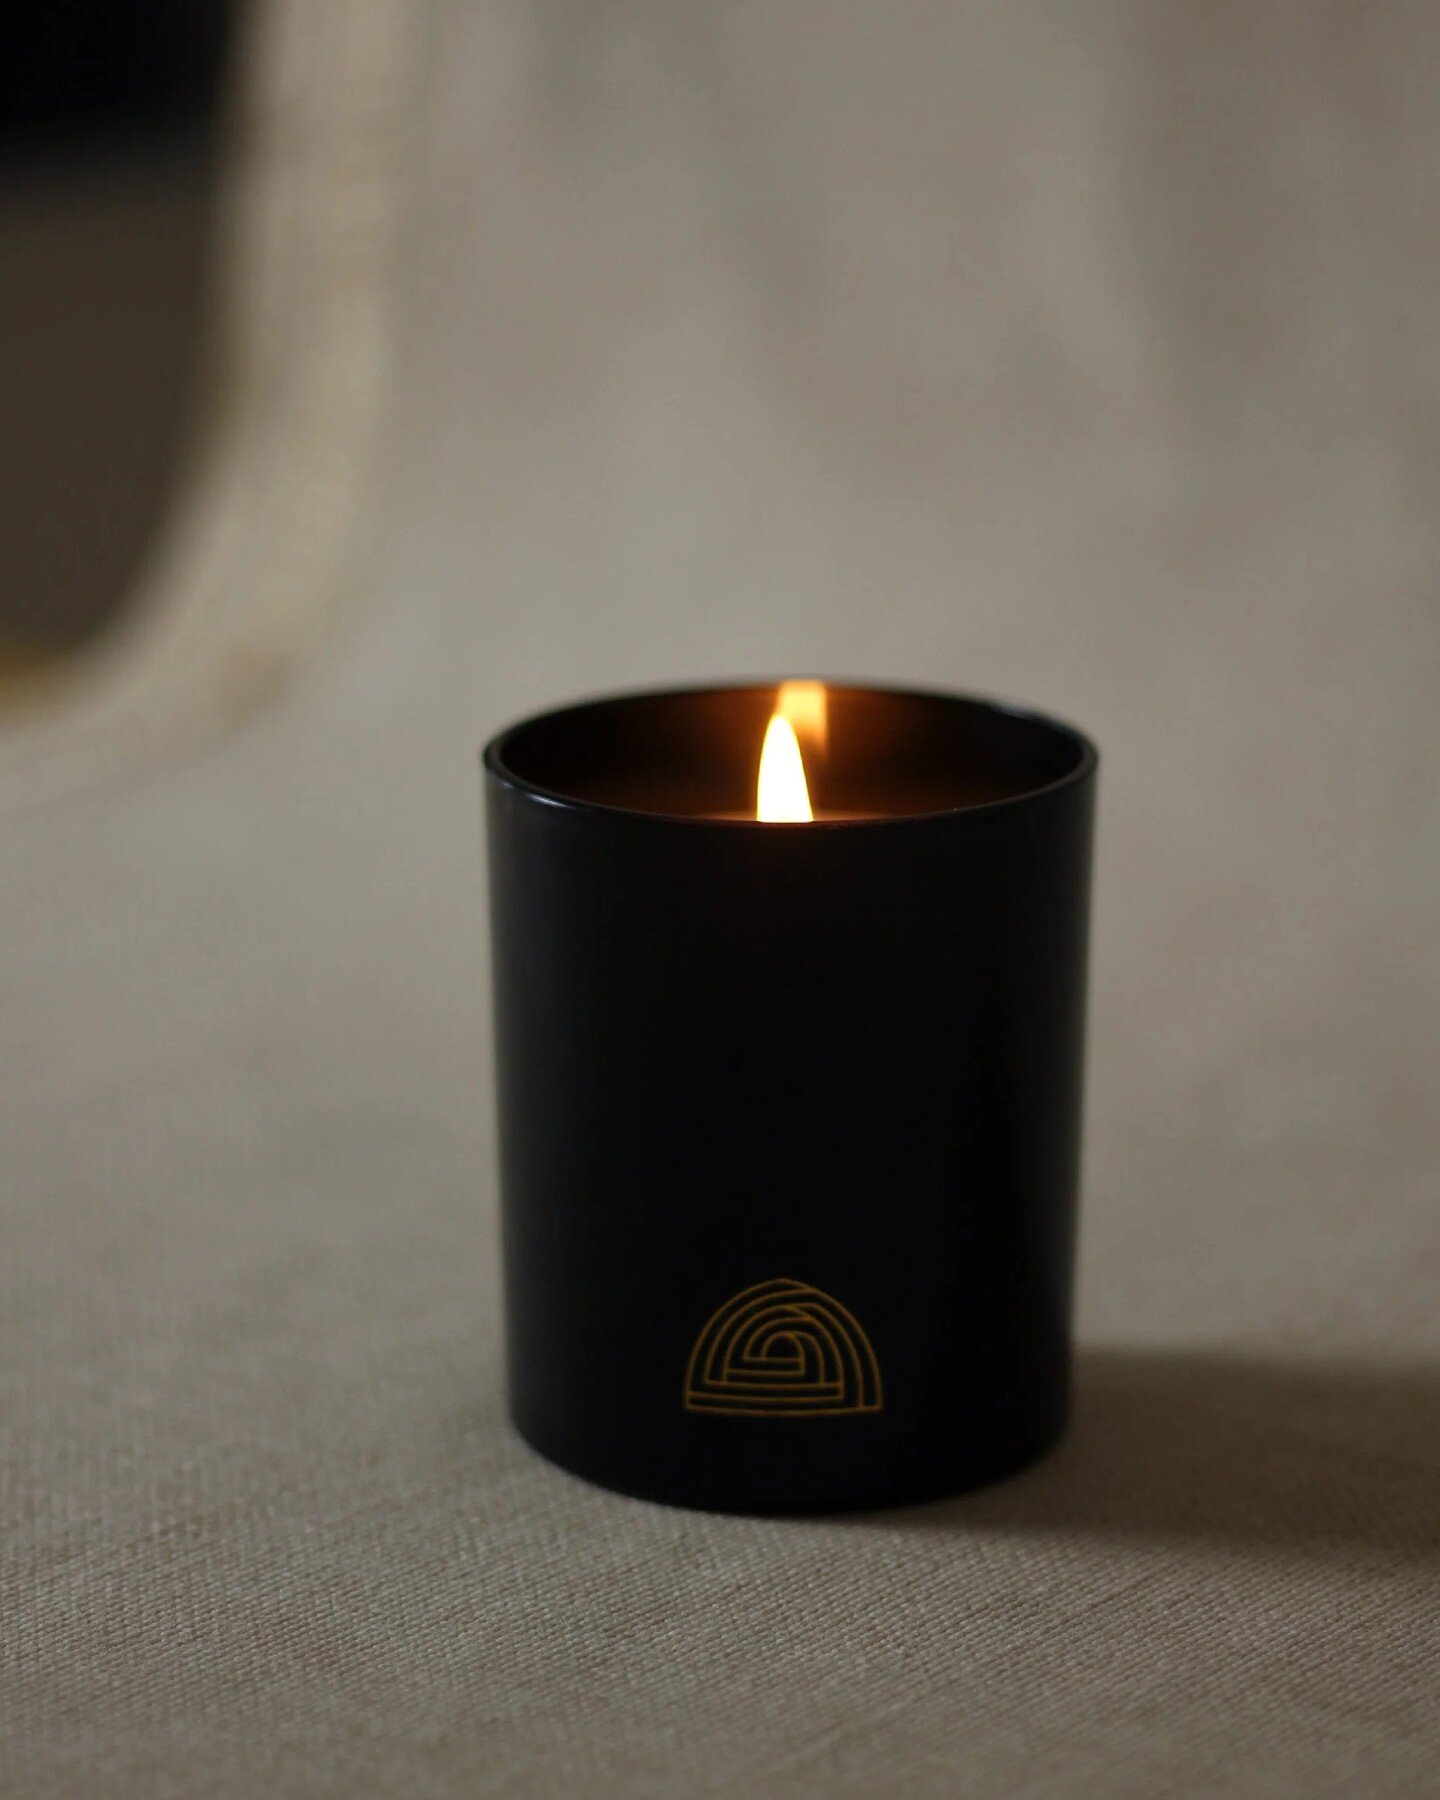 Bzzwax hive icon on The Jar candle.

Bzzwax is a London-based candle maker that prides itself on creating candles with ingredients that come straight from mother nature, using organic beeswax.⁣
⁣
@__bzzwax__